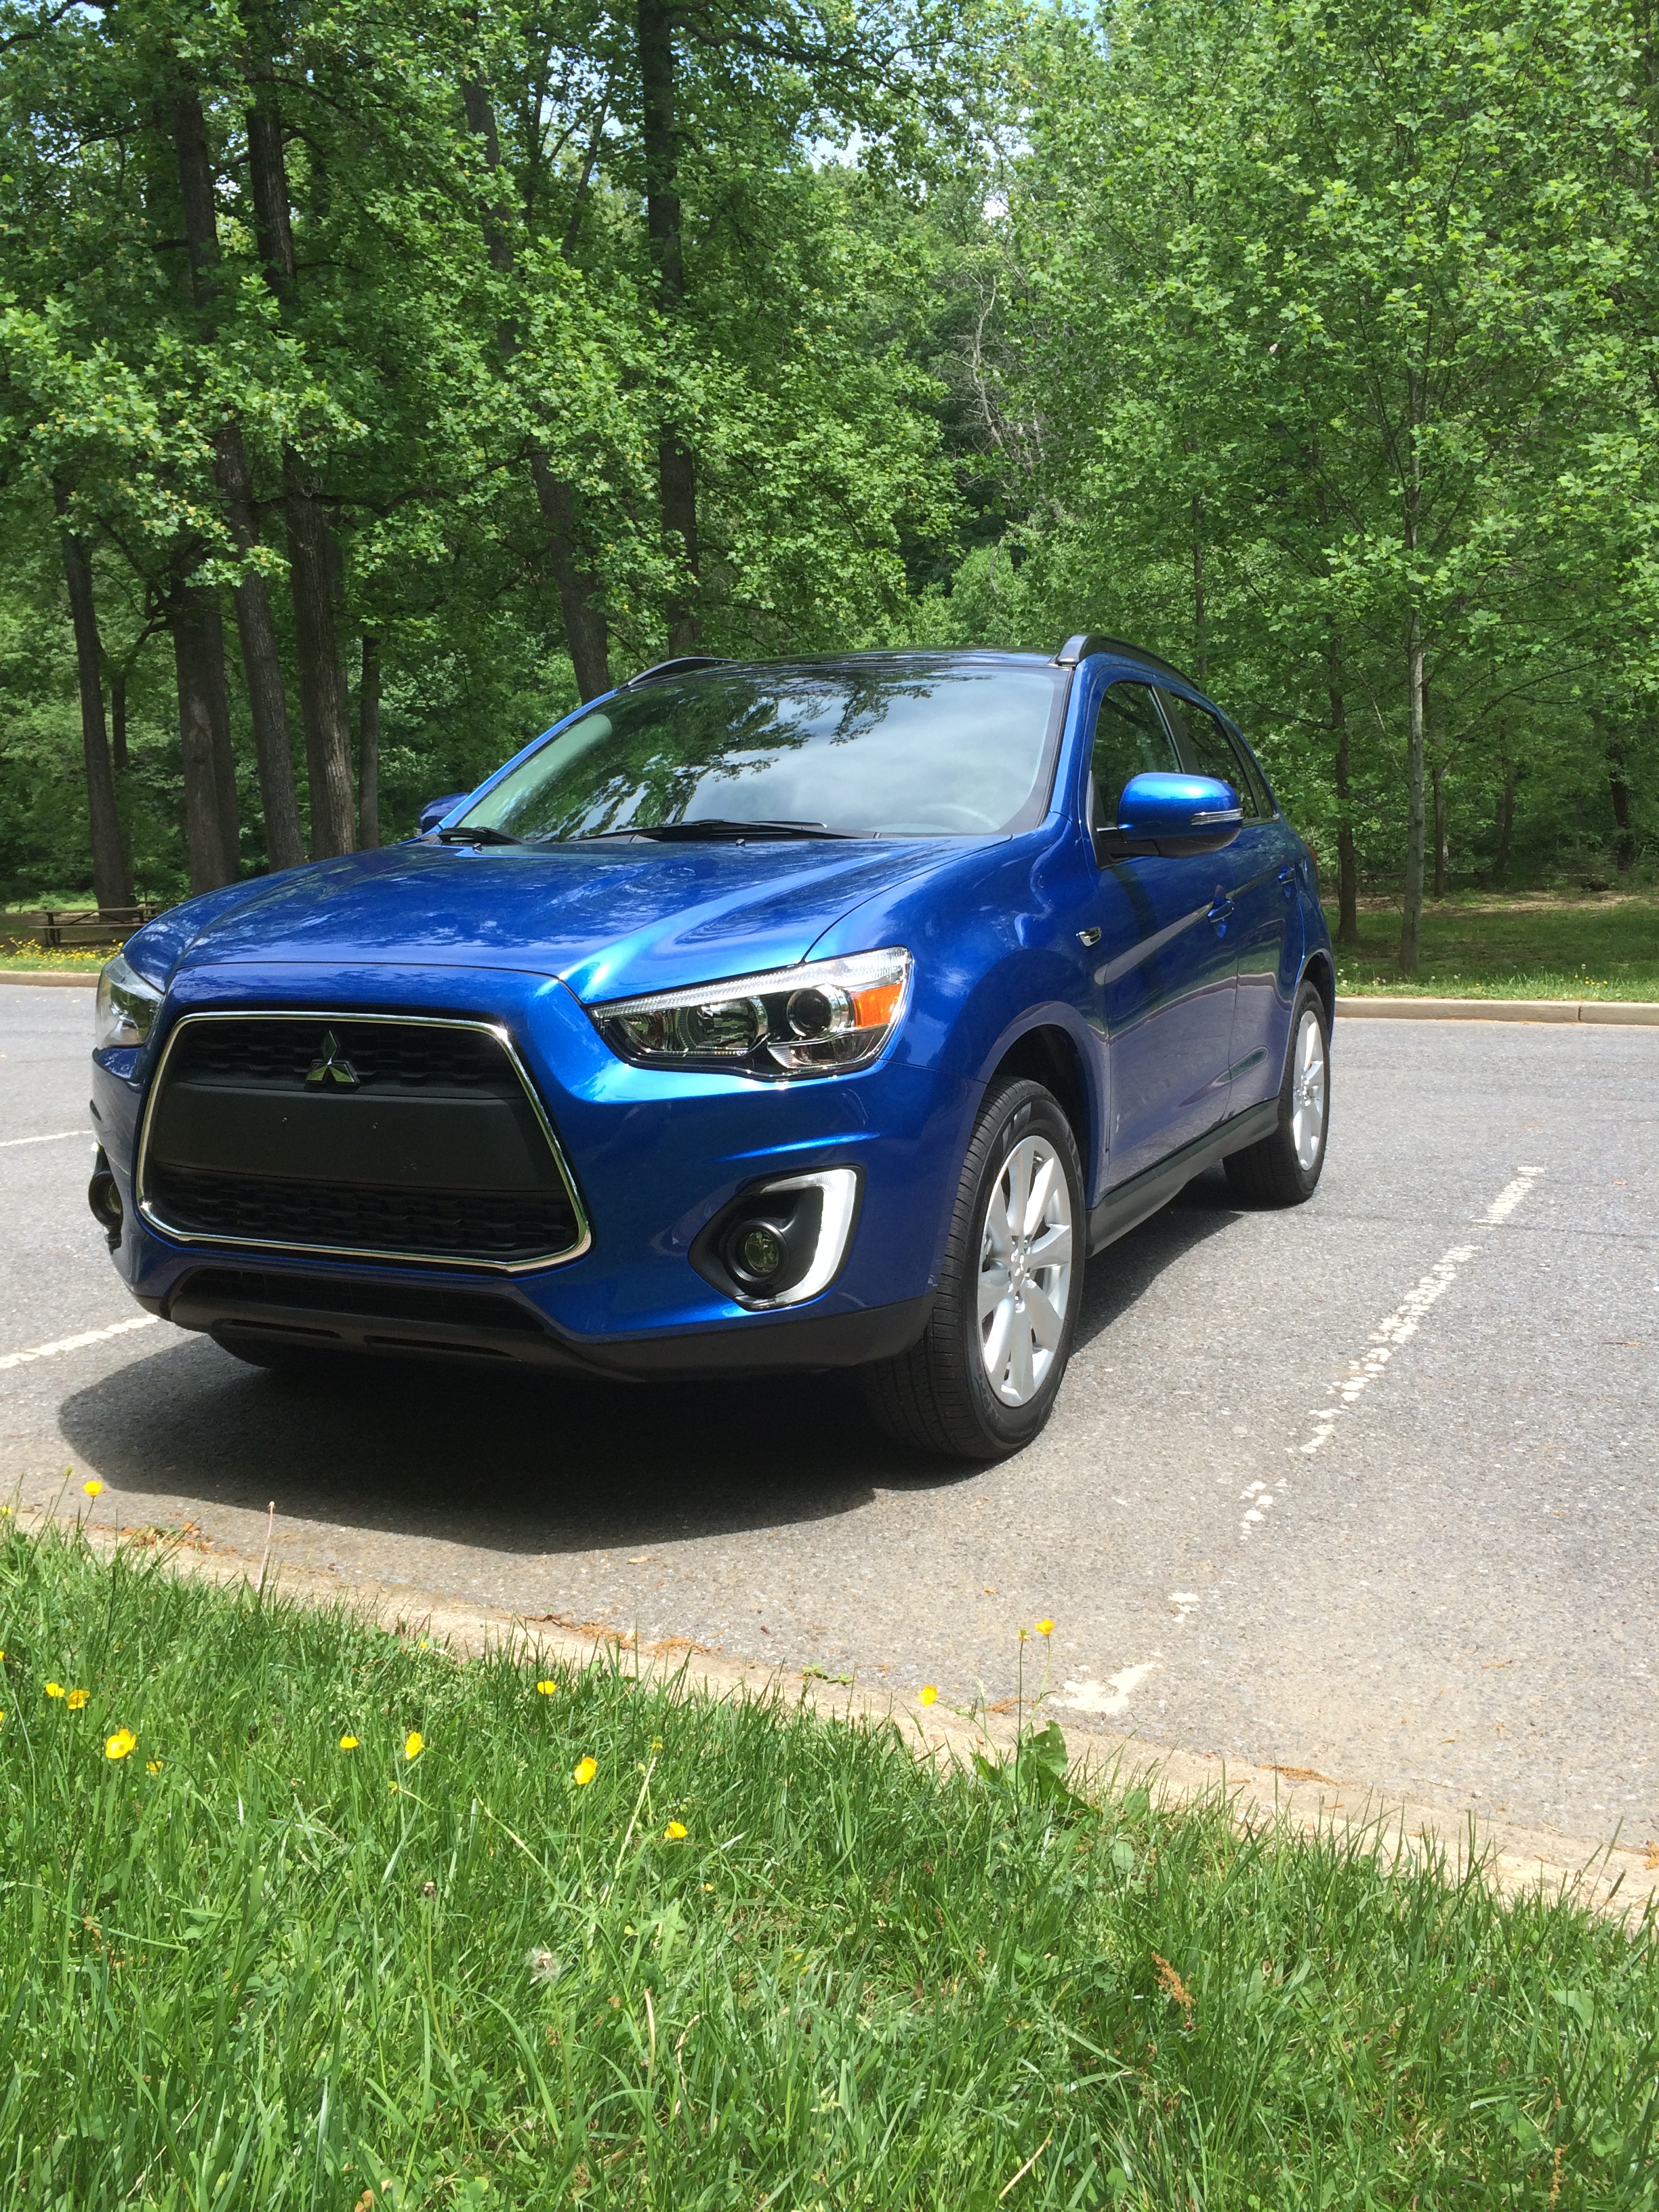 Mitsubishi Outlander Sport adds more power for 2015